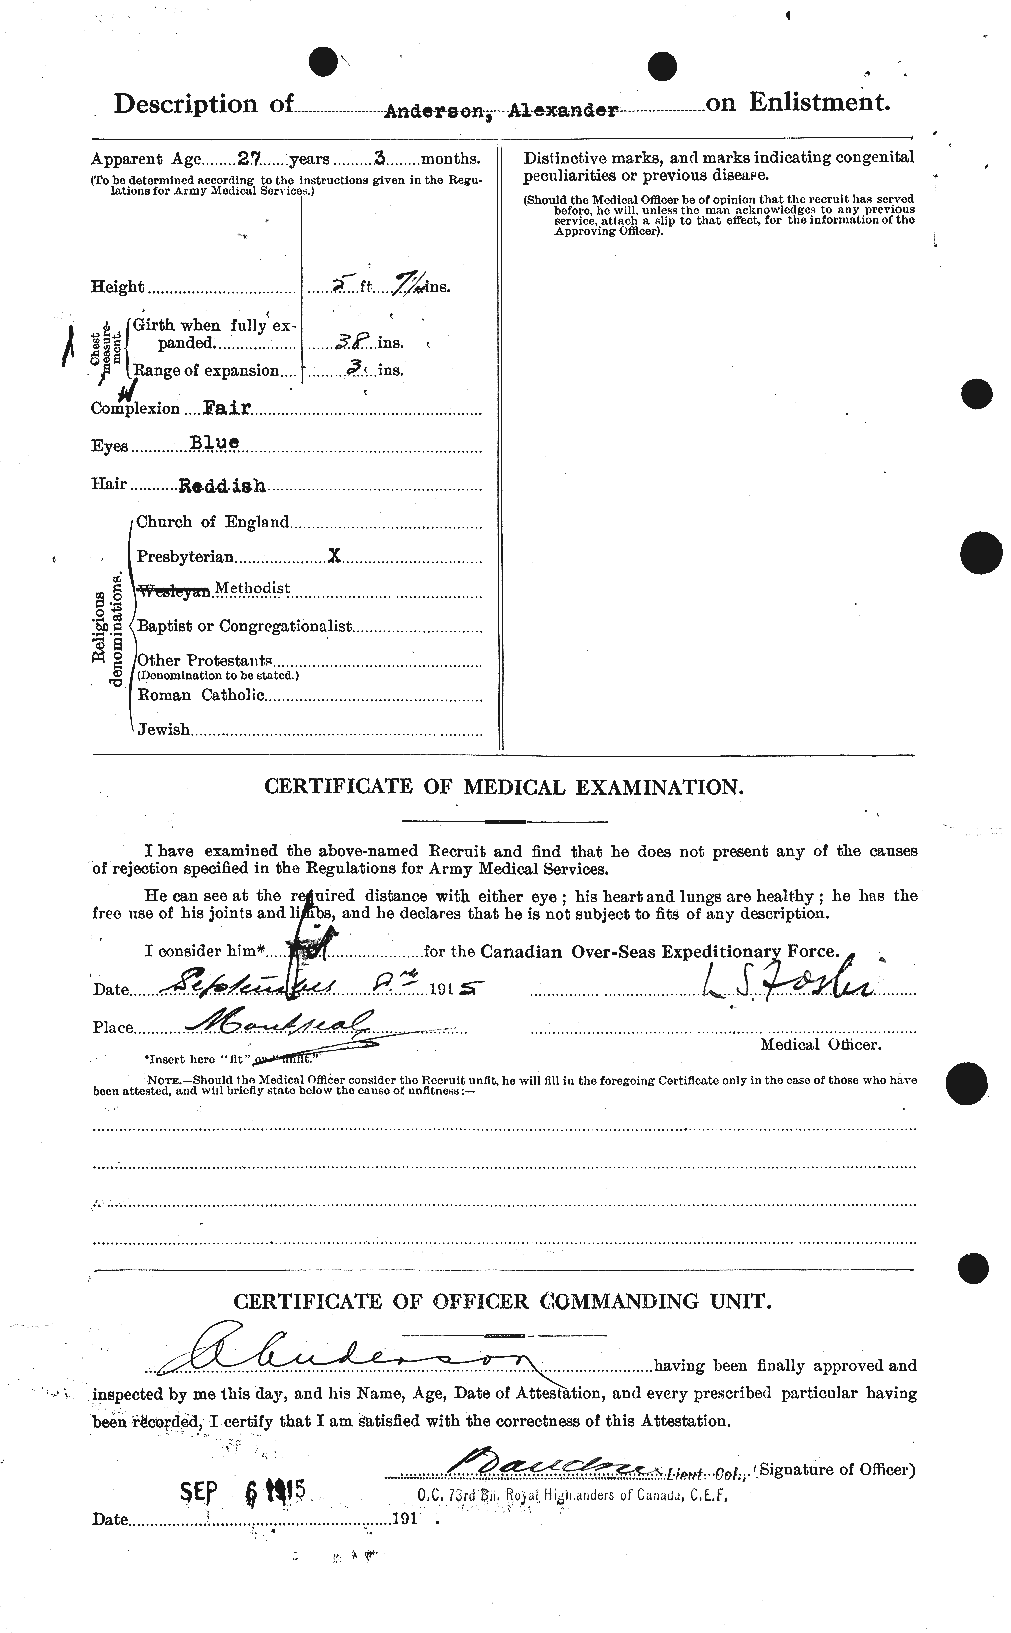 Personnel Records of the First World War - CEF 209506b